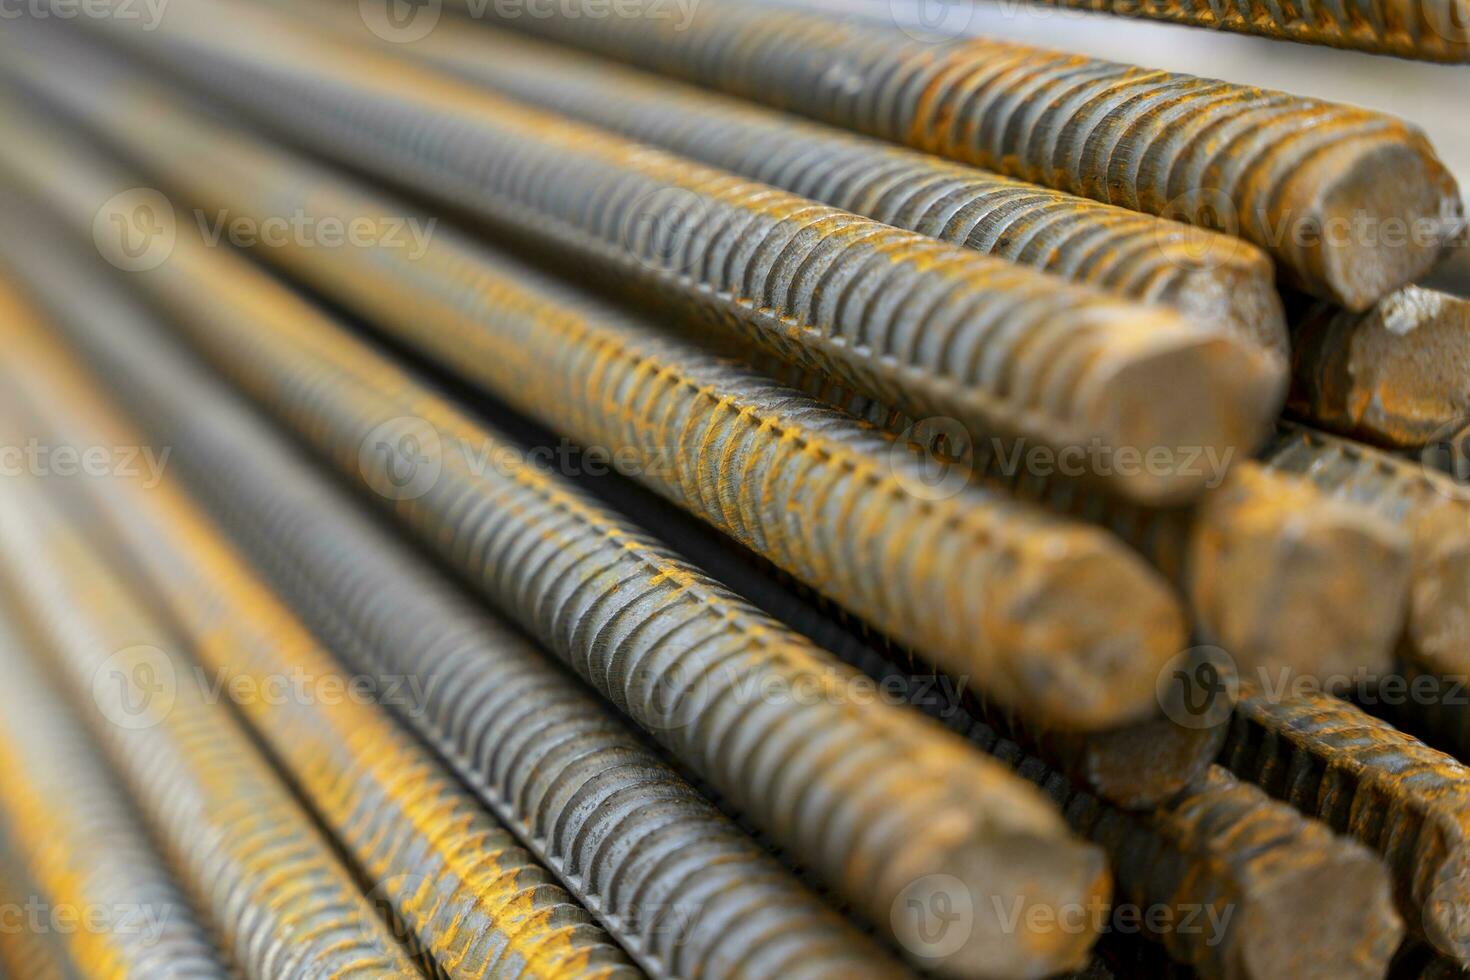 A large bundle of iron construction fittings in close-up photo